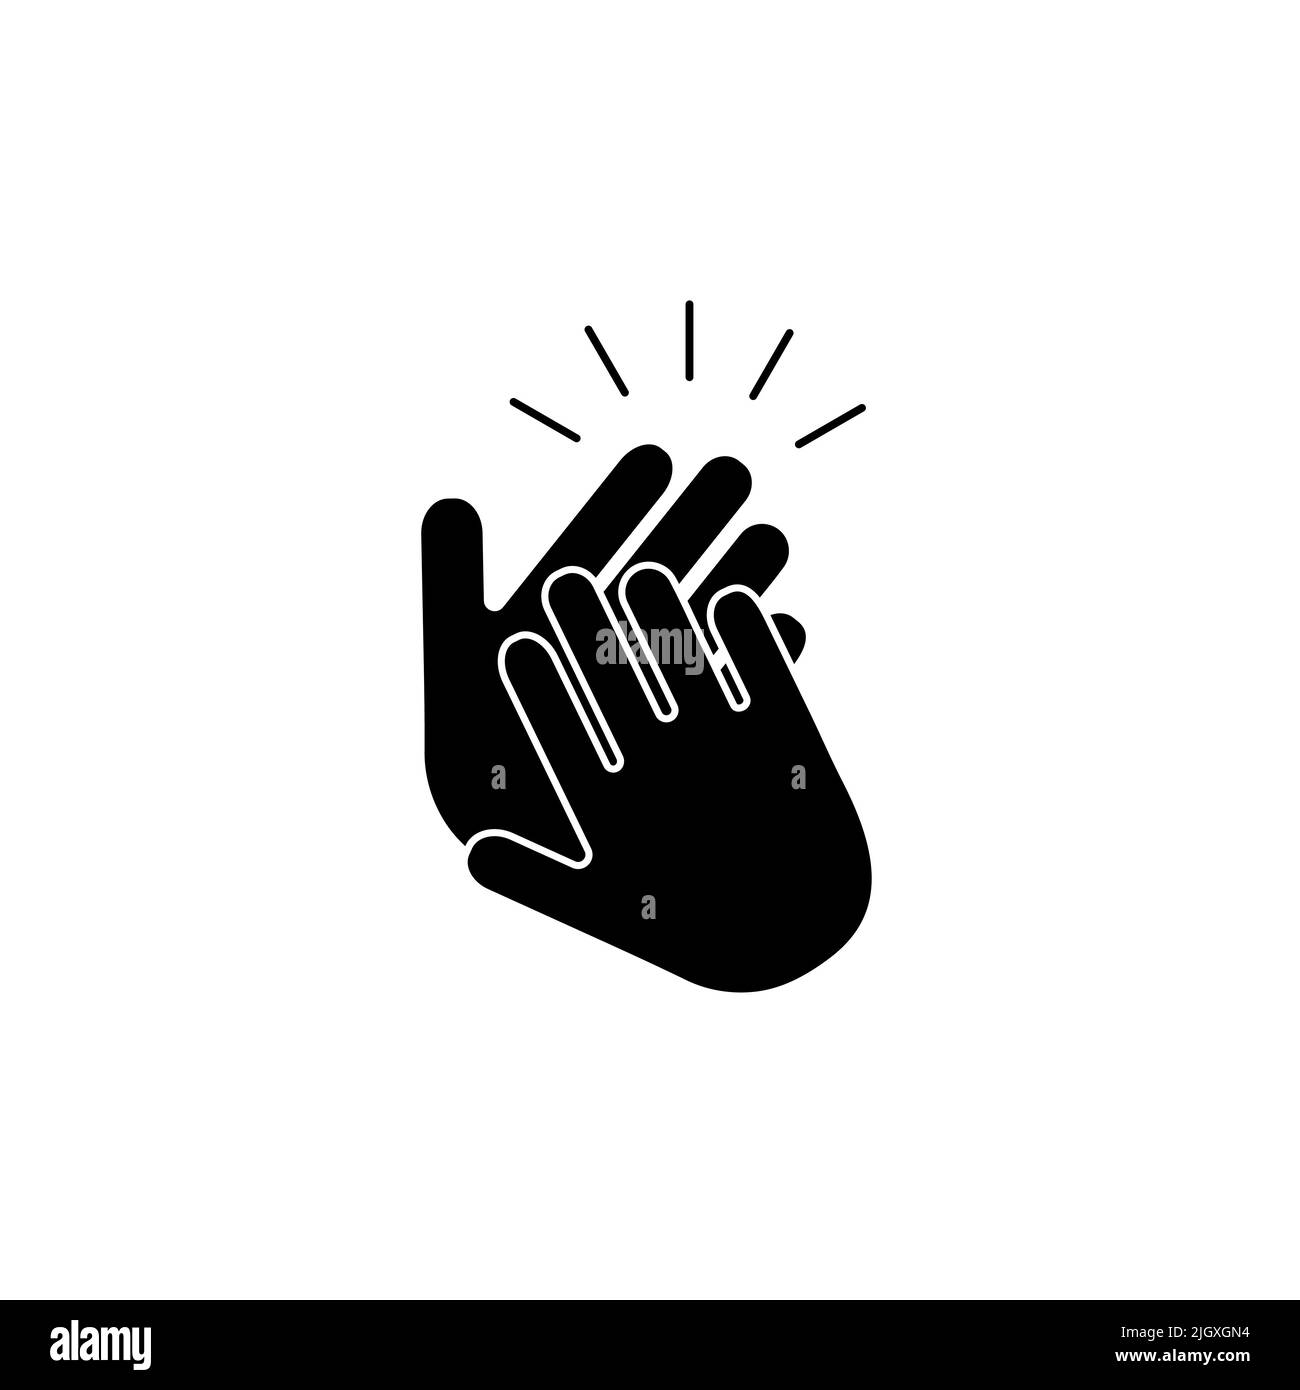 Clapping hands icon vector isolated on white background Stock Vector